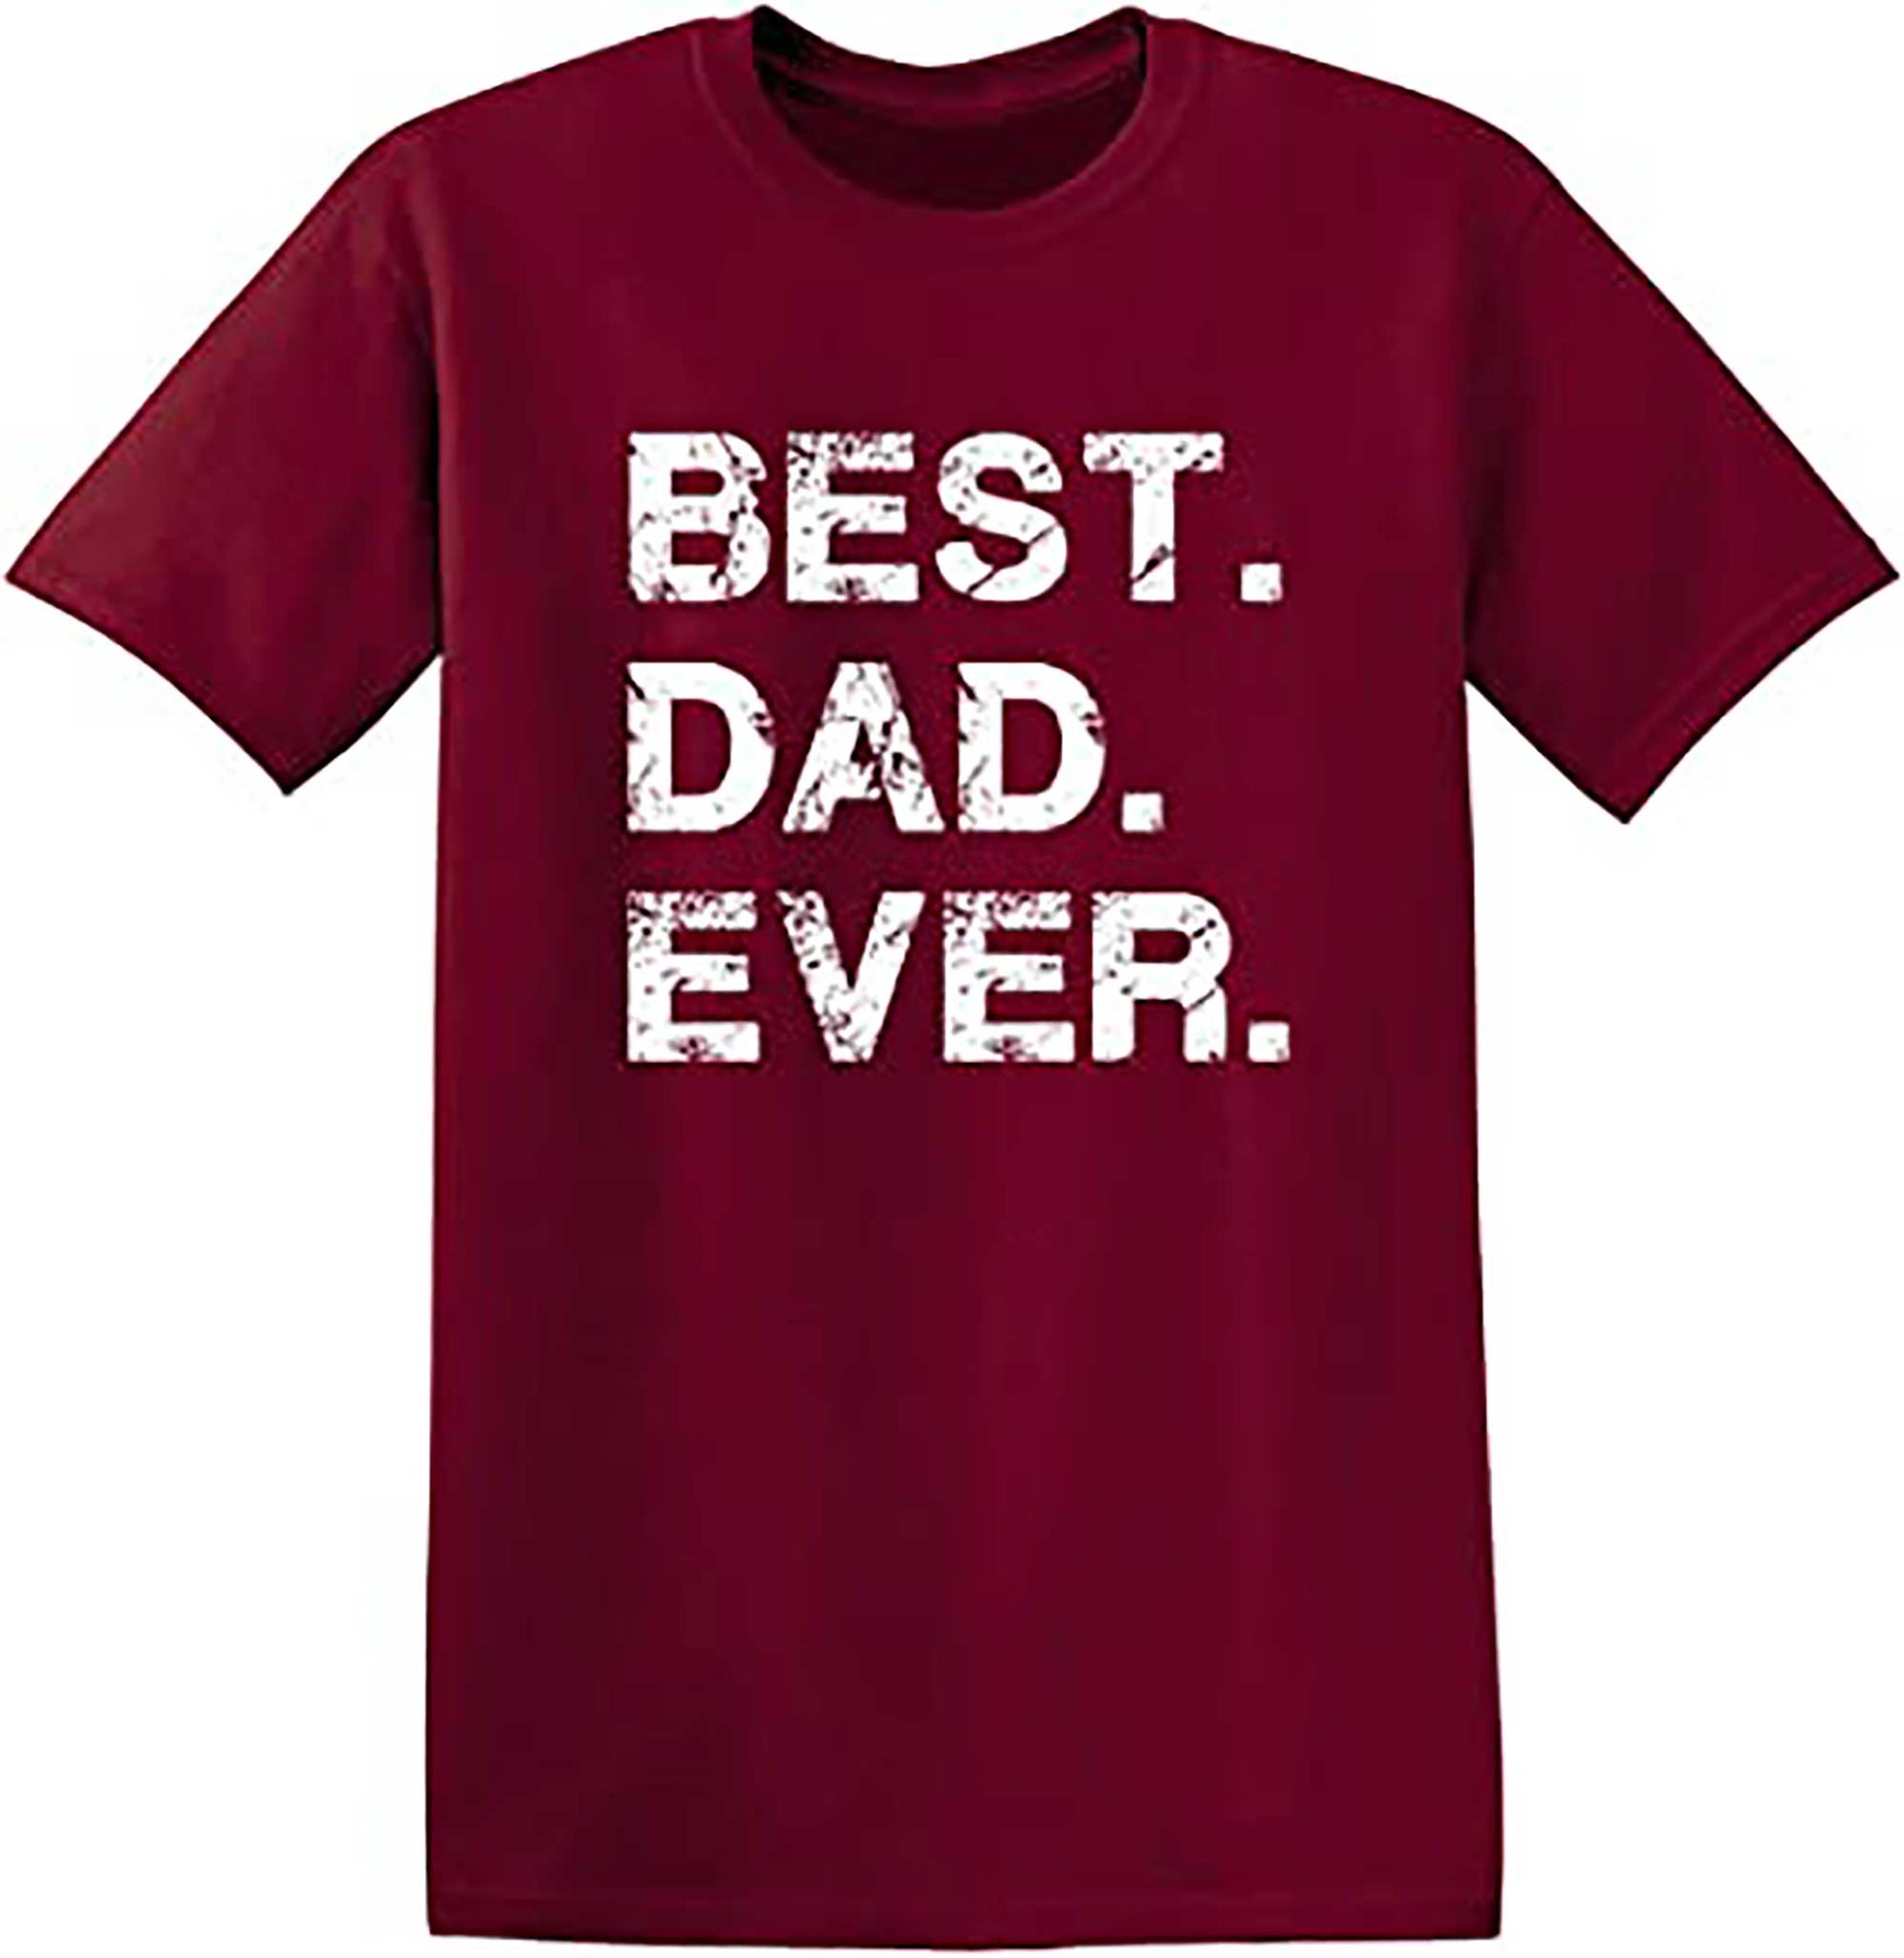 Skitongift Best Dad Ever Gift for Dad Husband Mens Funny T Shirt